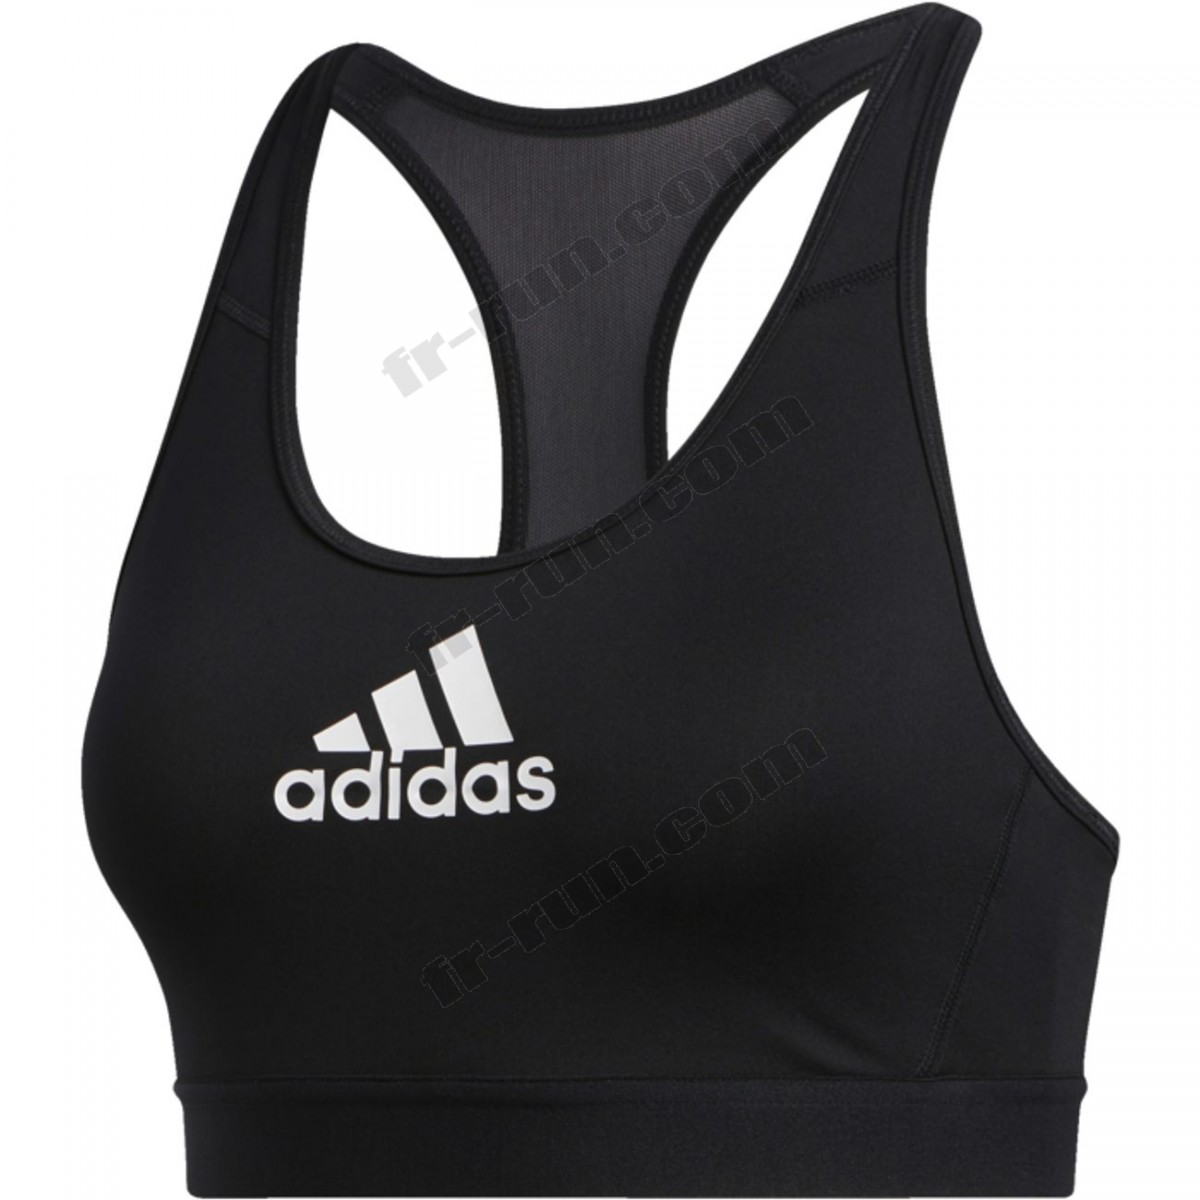 Adidas/BRASSIERE Fitness femme ADIDAS DRST ASK √ Nouveau style √ Soldes - -0